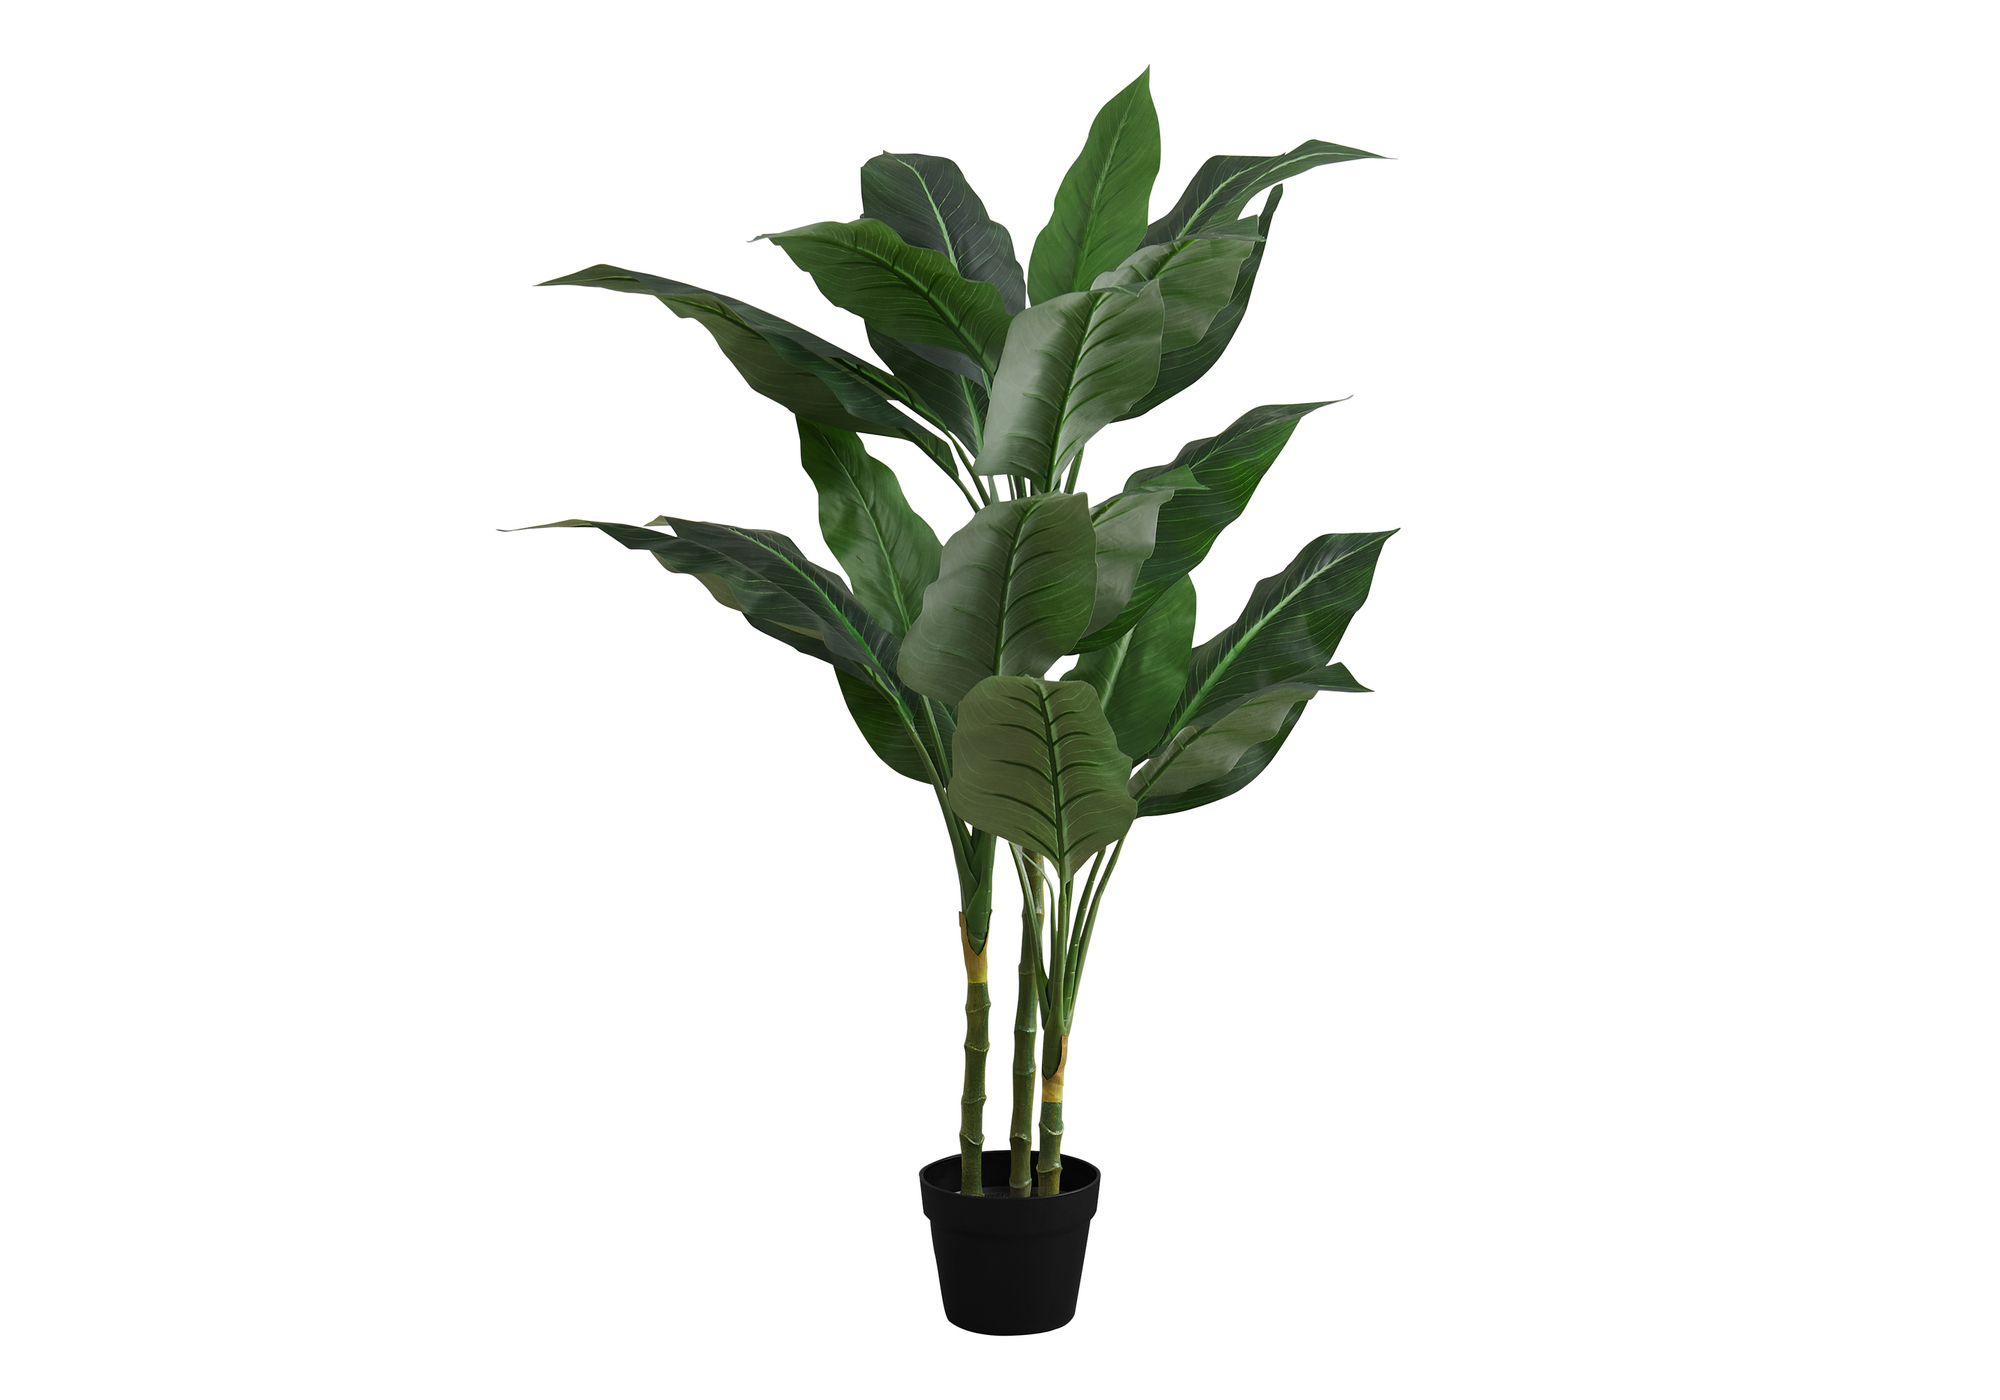 ARTIFICIAL PLANT - 42"H / INDOOR EVERGREEN IN A 5" POT